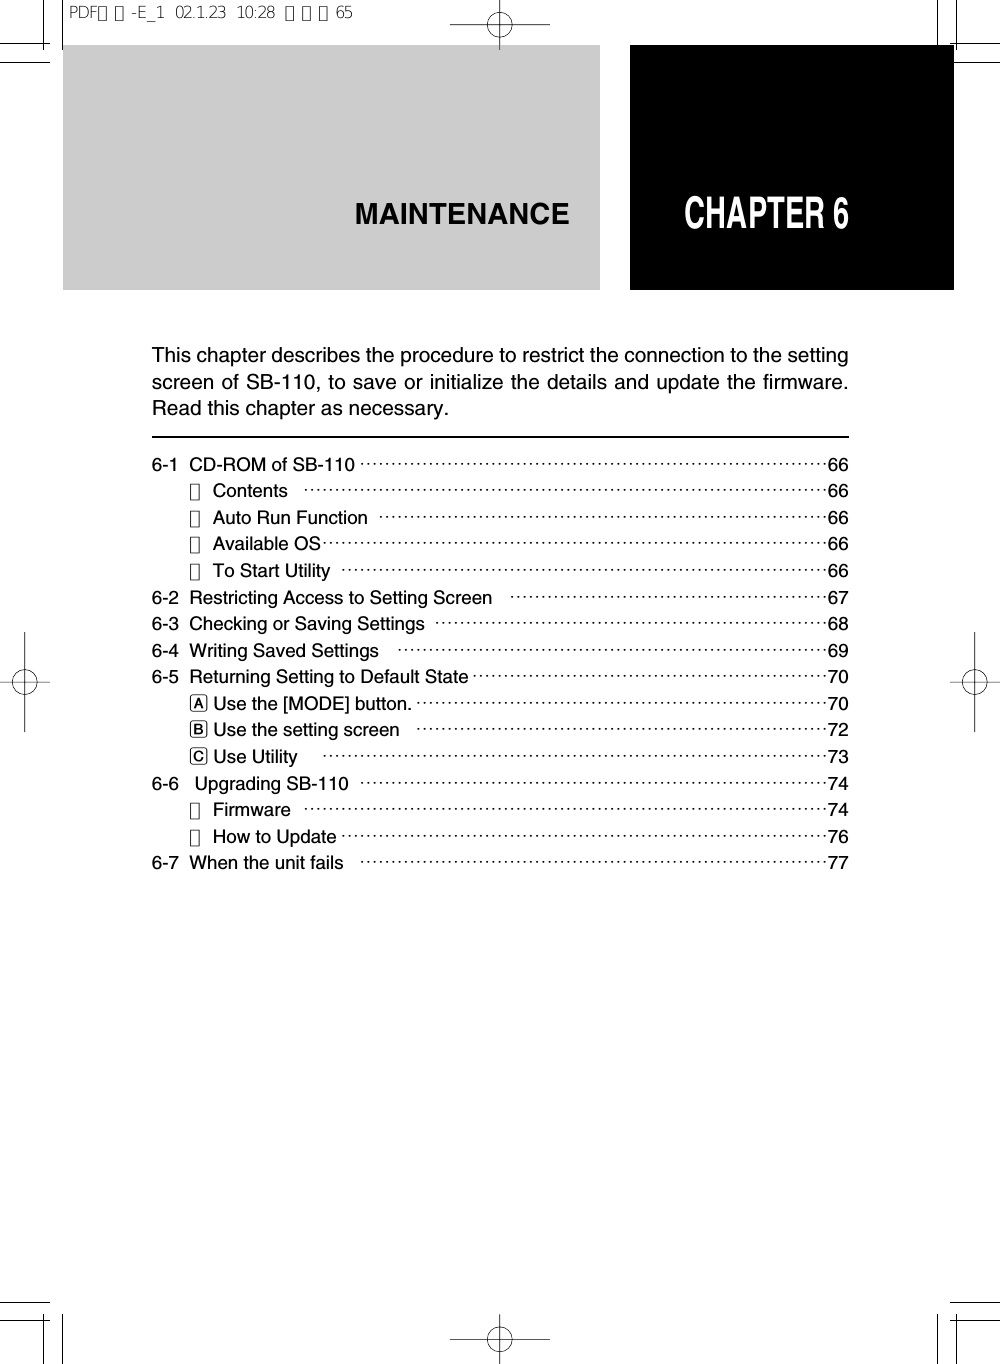 CHAPTER 6MAINTENANCE6-1 CD-ROM of SB-110 …………………………………………………………………66■Contents …………………………………………………………………………66■Auto Run Function ………………………………………………………………66■Available OS………………………………………………………………………66■To Start Utility ……………………………………………………………………666-2 Restricting Access to Setting Screen ……………………………………………676-3  Checking or Saving Settings ………………………………………………………686-4 Writing Saved Settings ……………………………………………………………696-5 Returning Setting to Default State …………………………………………………70AUse the [MODE] button. …………………………………………………………70BUse the setting screen  …………………………………………………………72CUse Utility  ………………………………………………………………………736-6 Upgrading SB-110 …………………………………………………………………74■Firmware …………………………………………………………………………74■How to Update ……………………………………………………………………766-7  When the unit fails …………………………………………………………………77This chapter describes the procedure to restrict the connection to the settingscreen of SB-110, to save or initialize the details and update the firmware.Read this chapter as necessary.PDF取説-E_1  02.1.23  10:28  ページ65